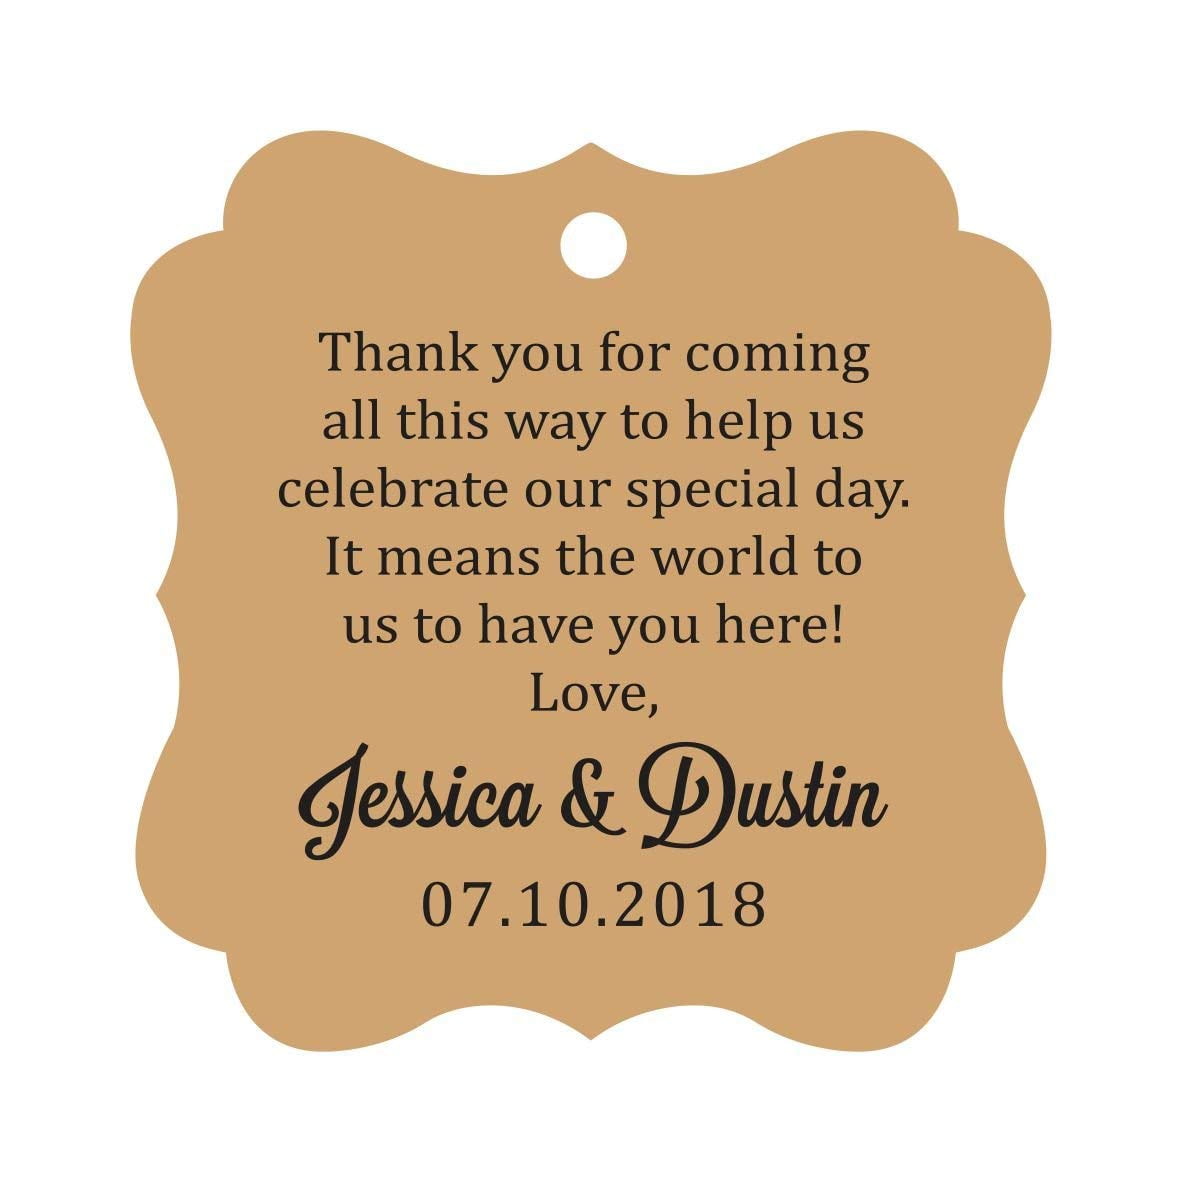 Juvale 100-Pack Wood Thank You Tags with Twine for Wedding and